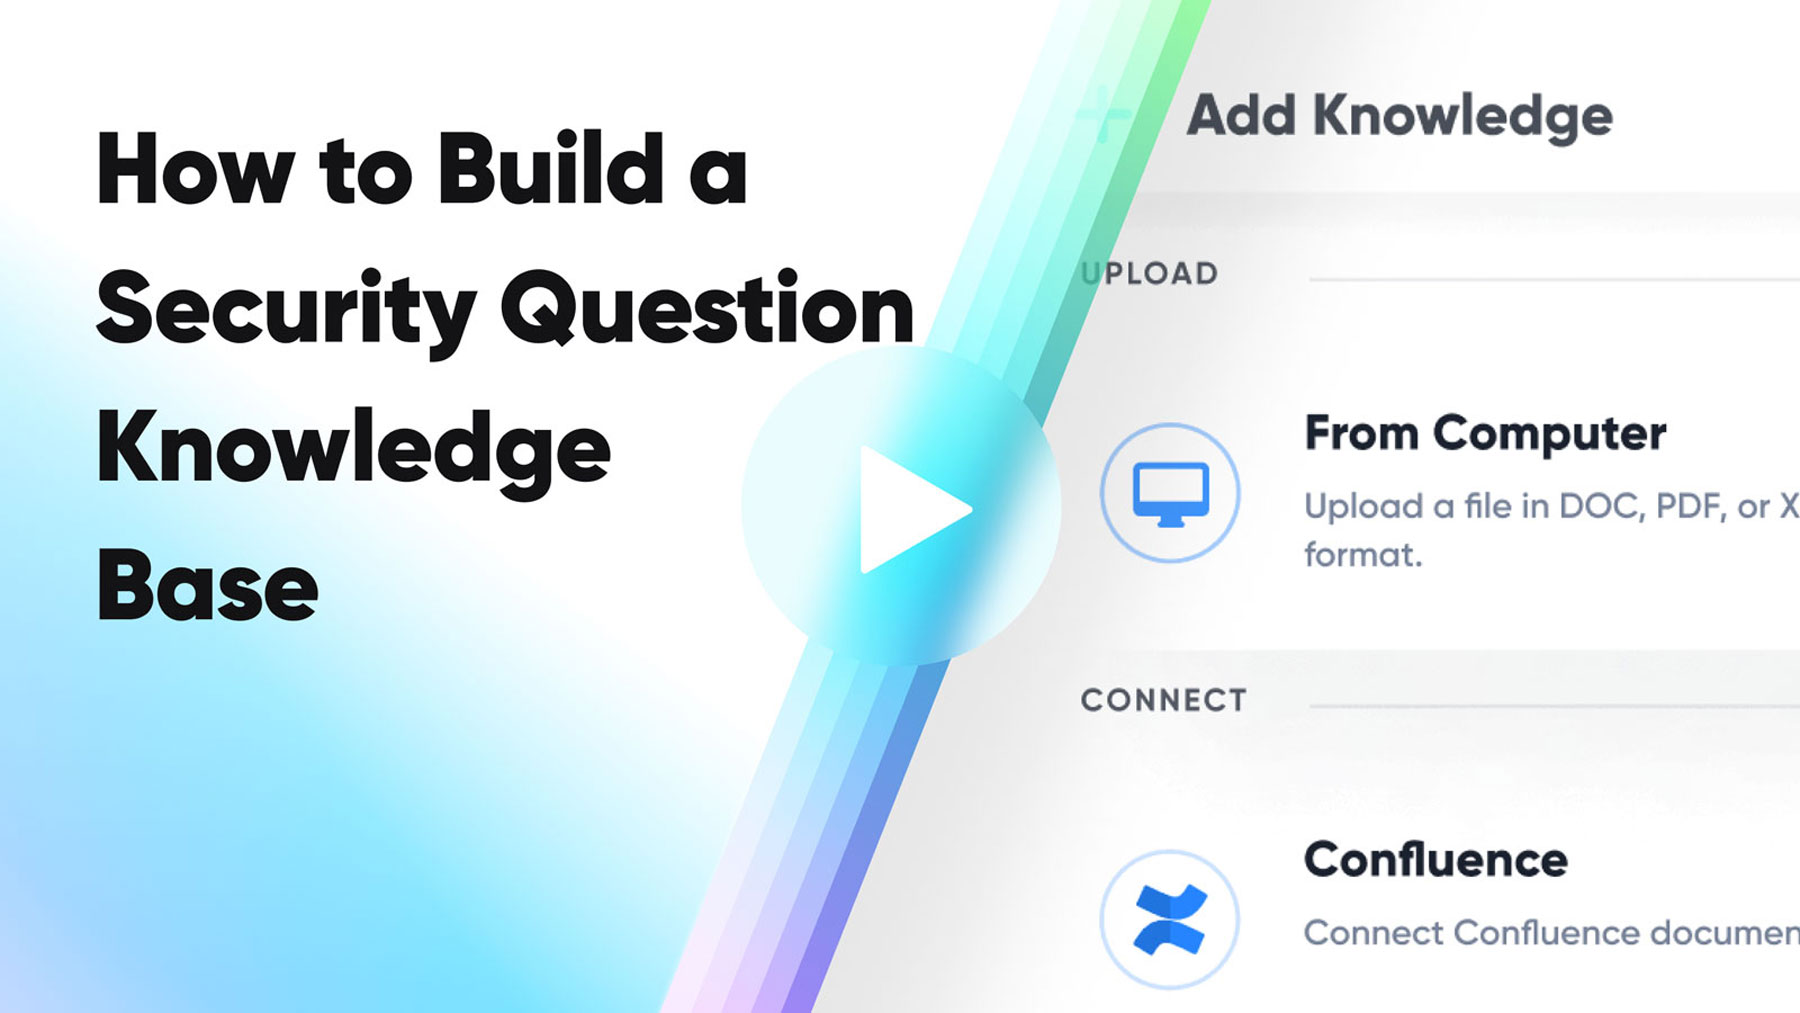 How to Build a Security Question Knowledge Base